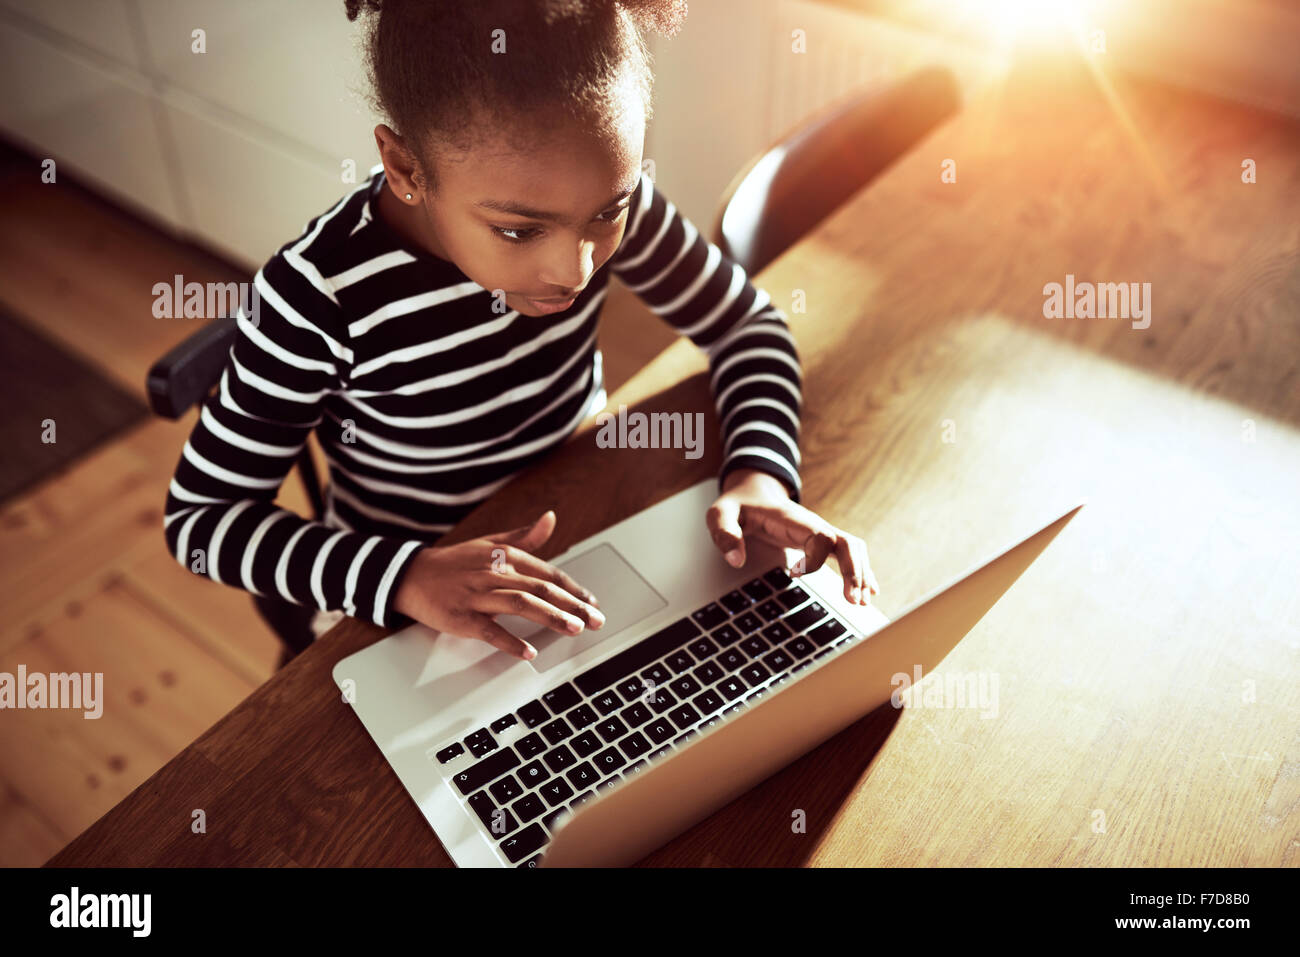 High angle view from above of a cute young African girl surfing the web on a laptop computer in an educational or recreational c Stock Photo